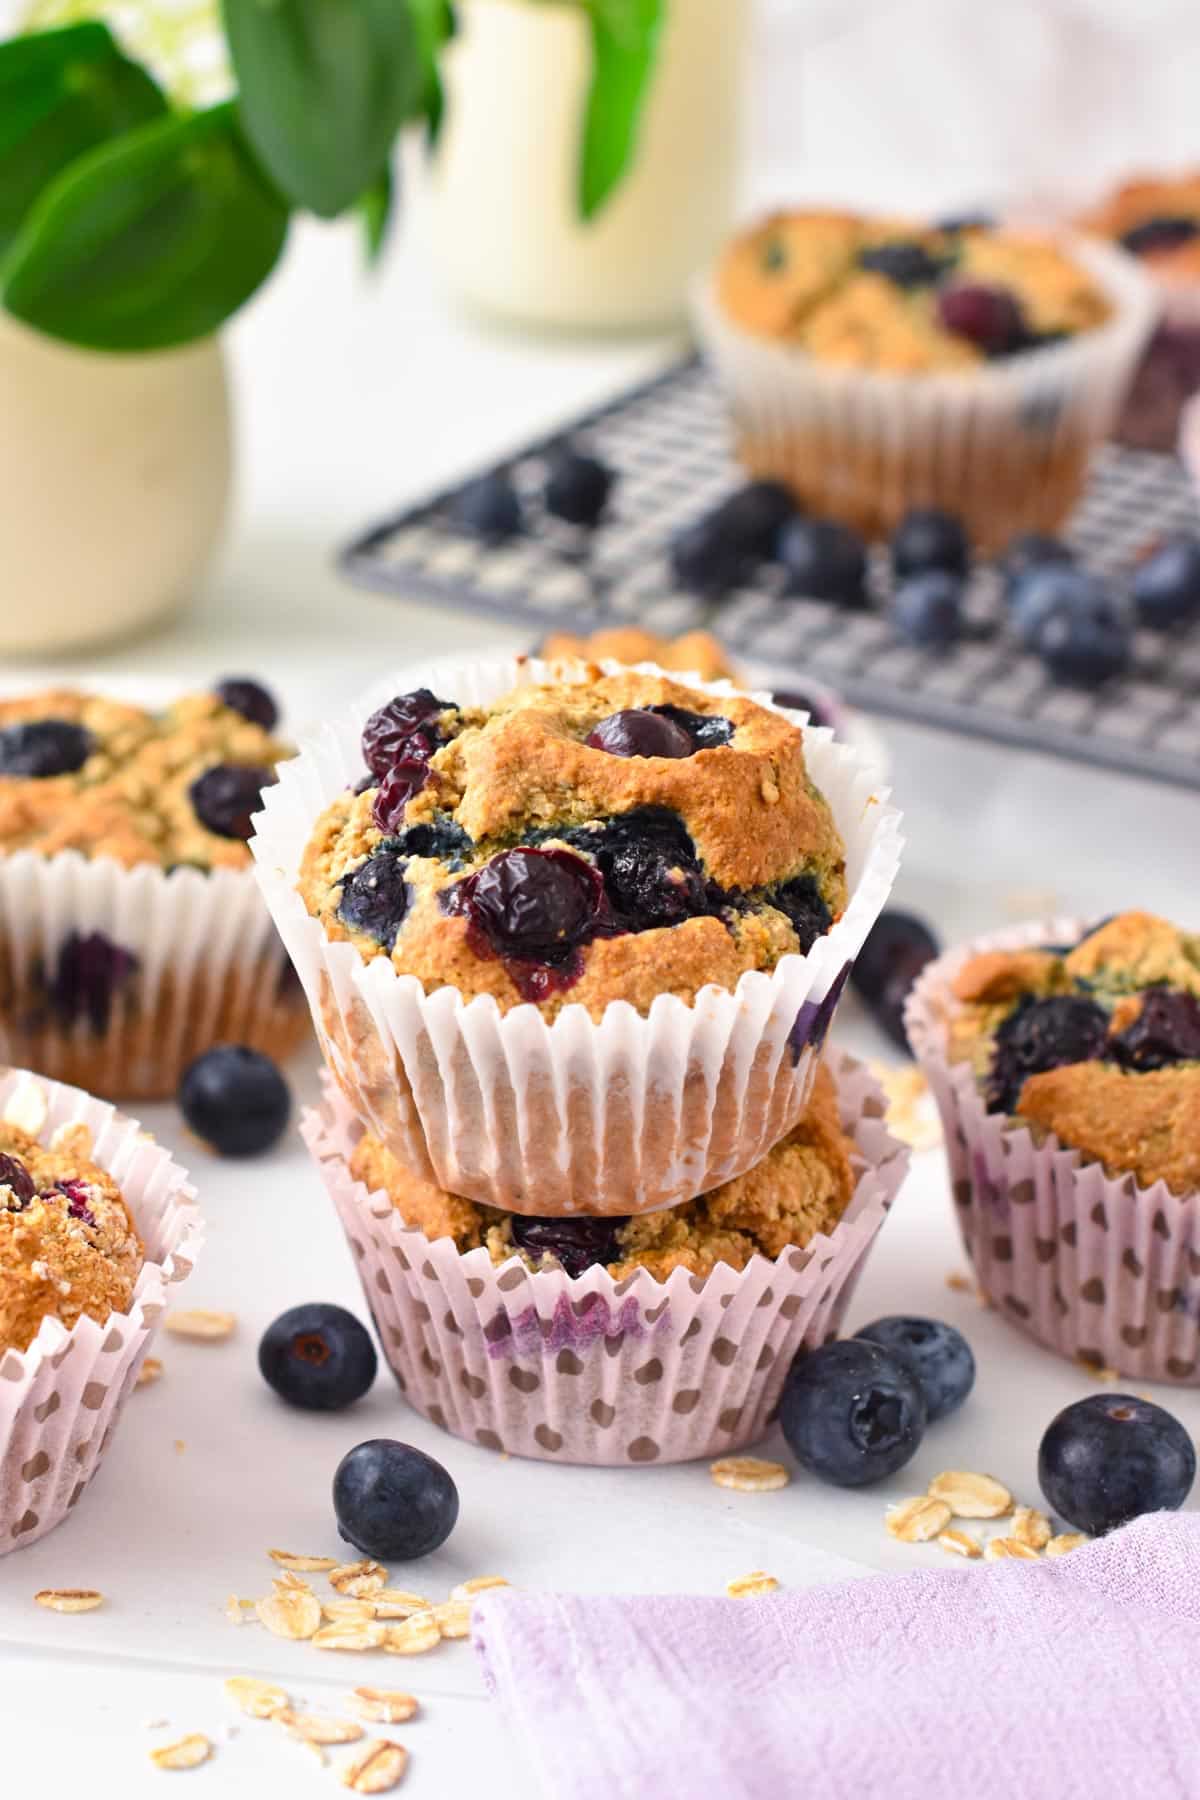 A stack of two Vegan Gluten Free Blueberry Muffins next to more muffins and fresh blueberries,